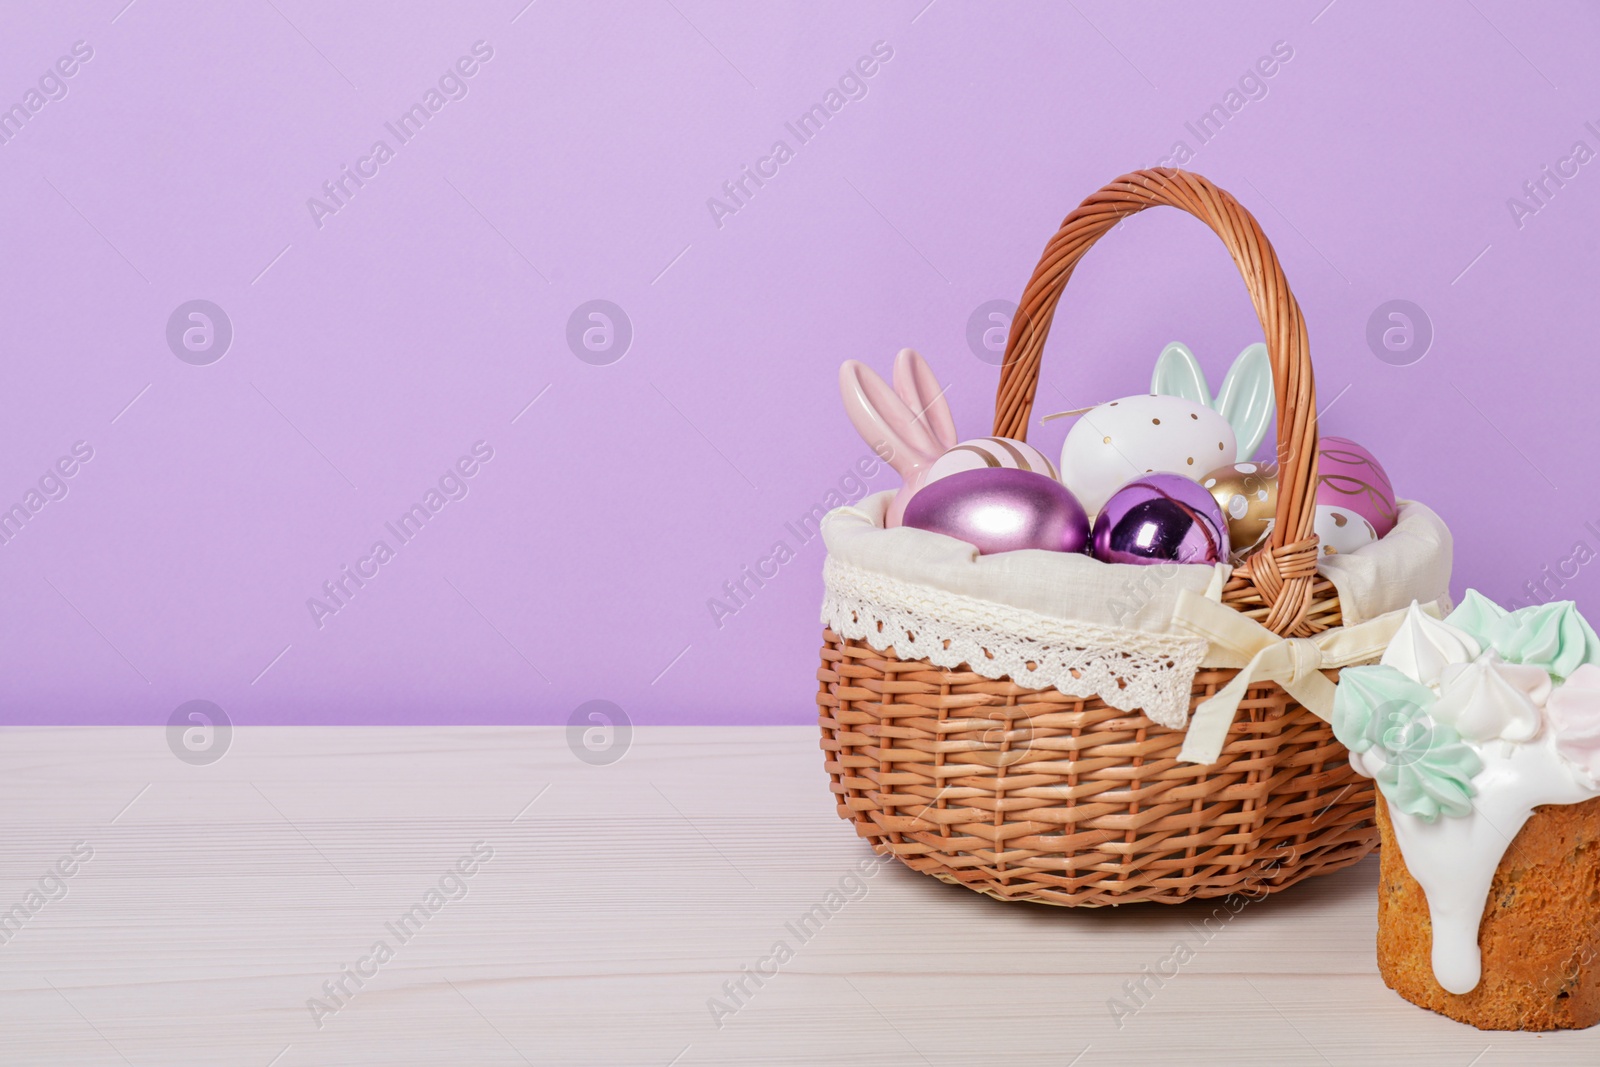 Photo of Easter basket with painted eggs, decorations and tasty cake on white wooden table. Space for text